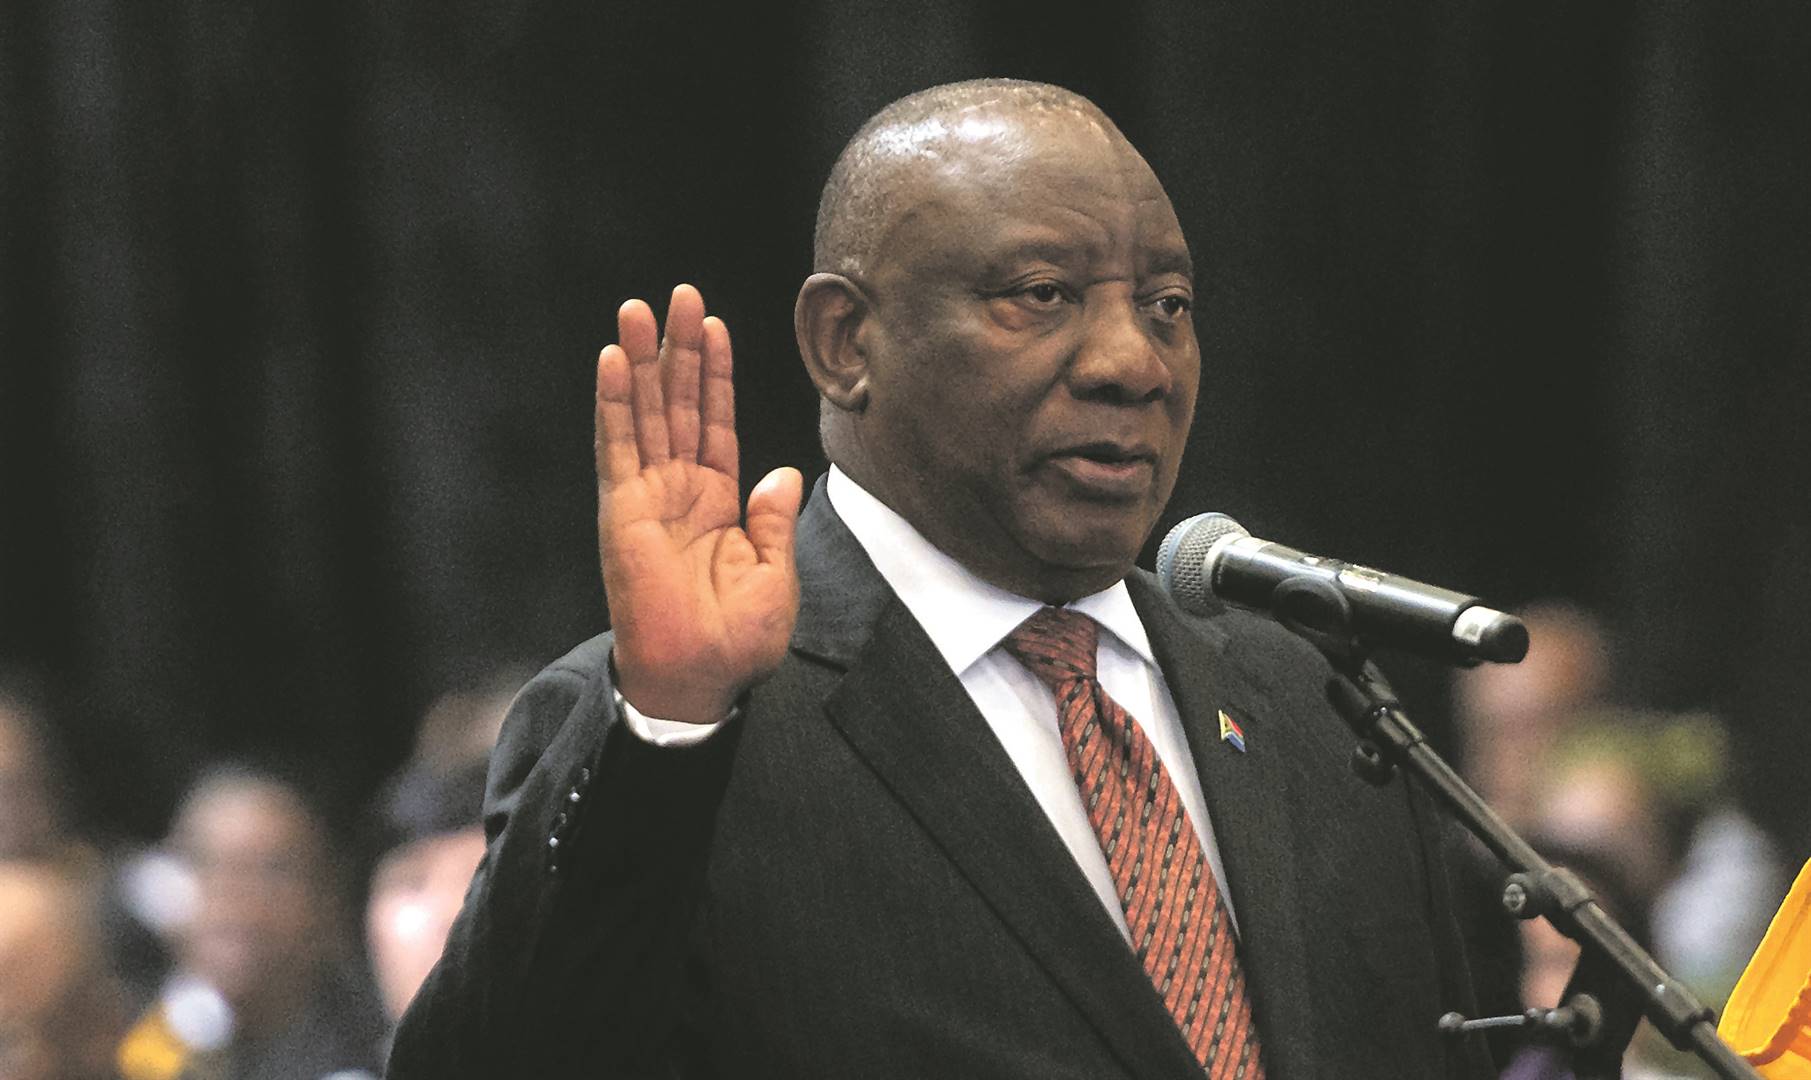 On Friday, President Cyril Ramaphosa was sworn in for a second term 